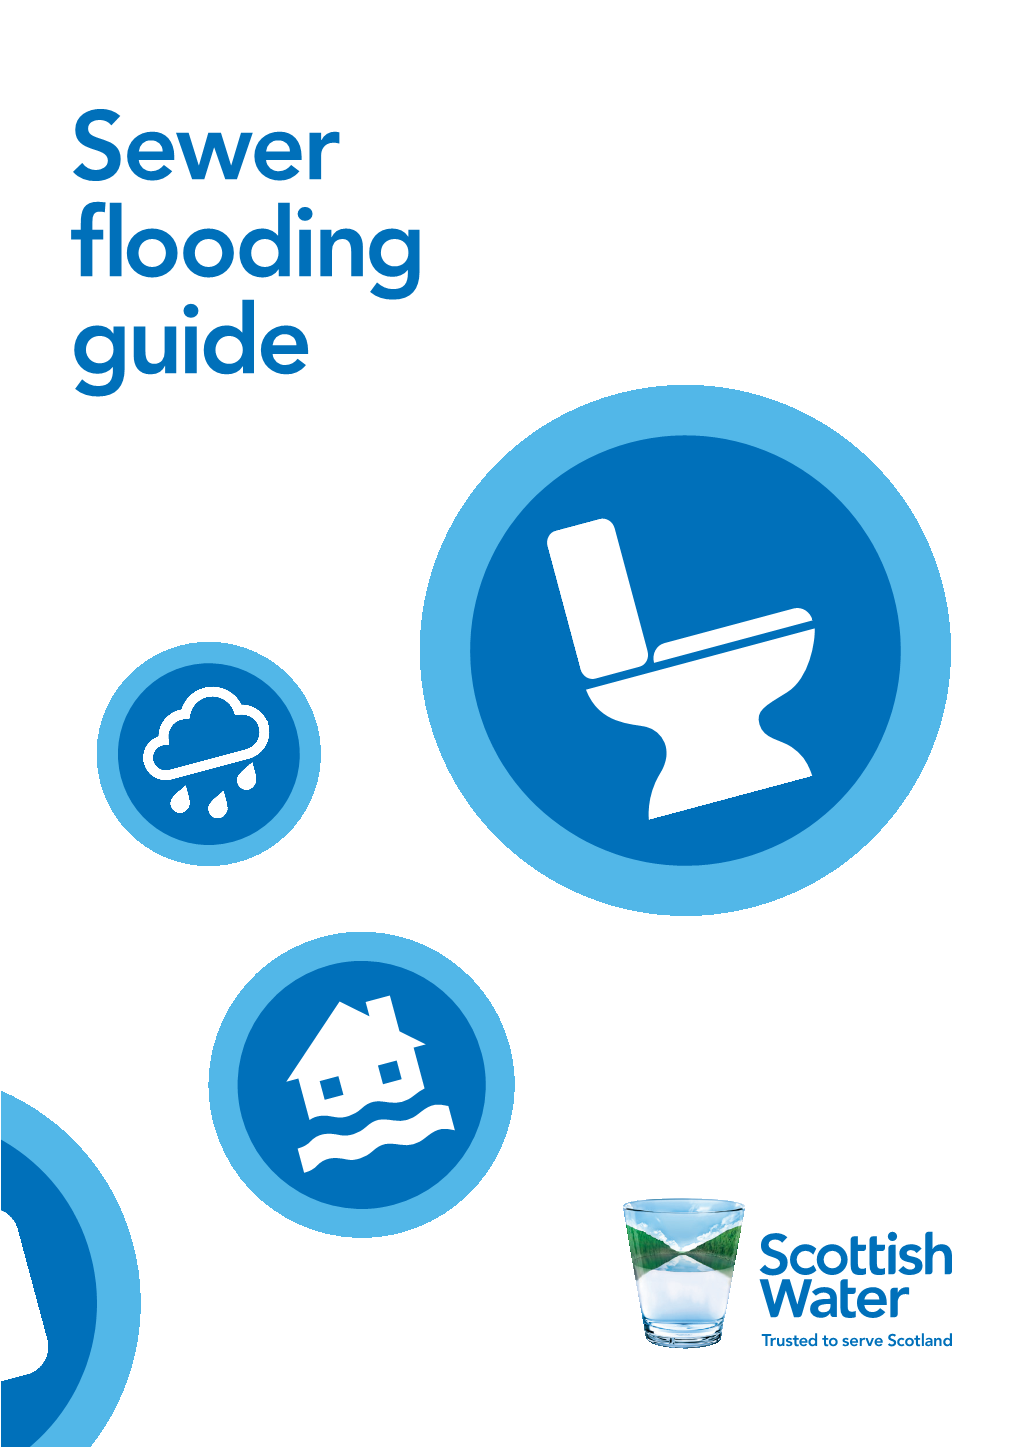 Sewer Flooding Guide We Are Very Sorry You Have Suffered Flooding from the Public Sewer